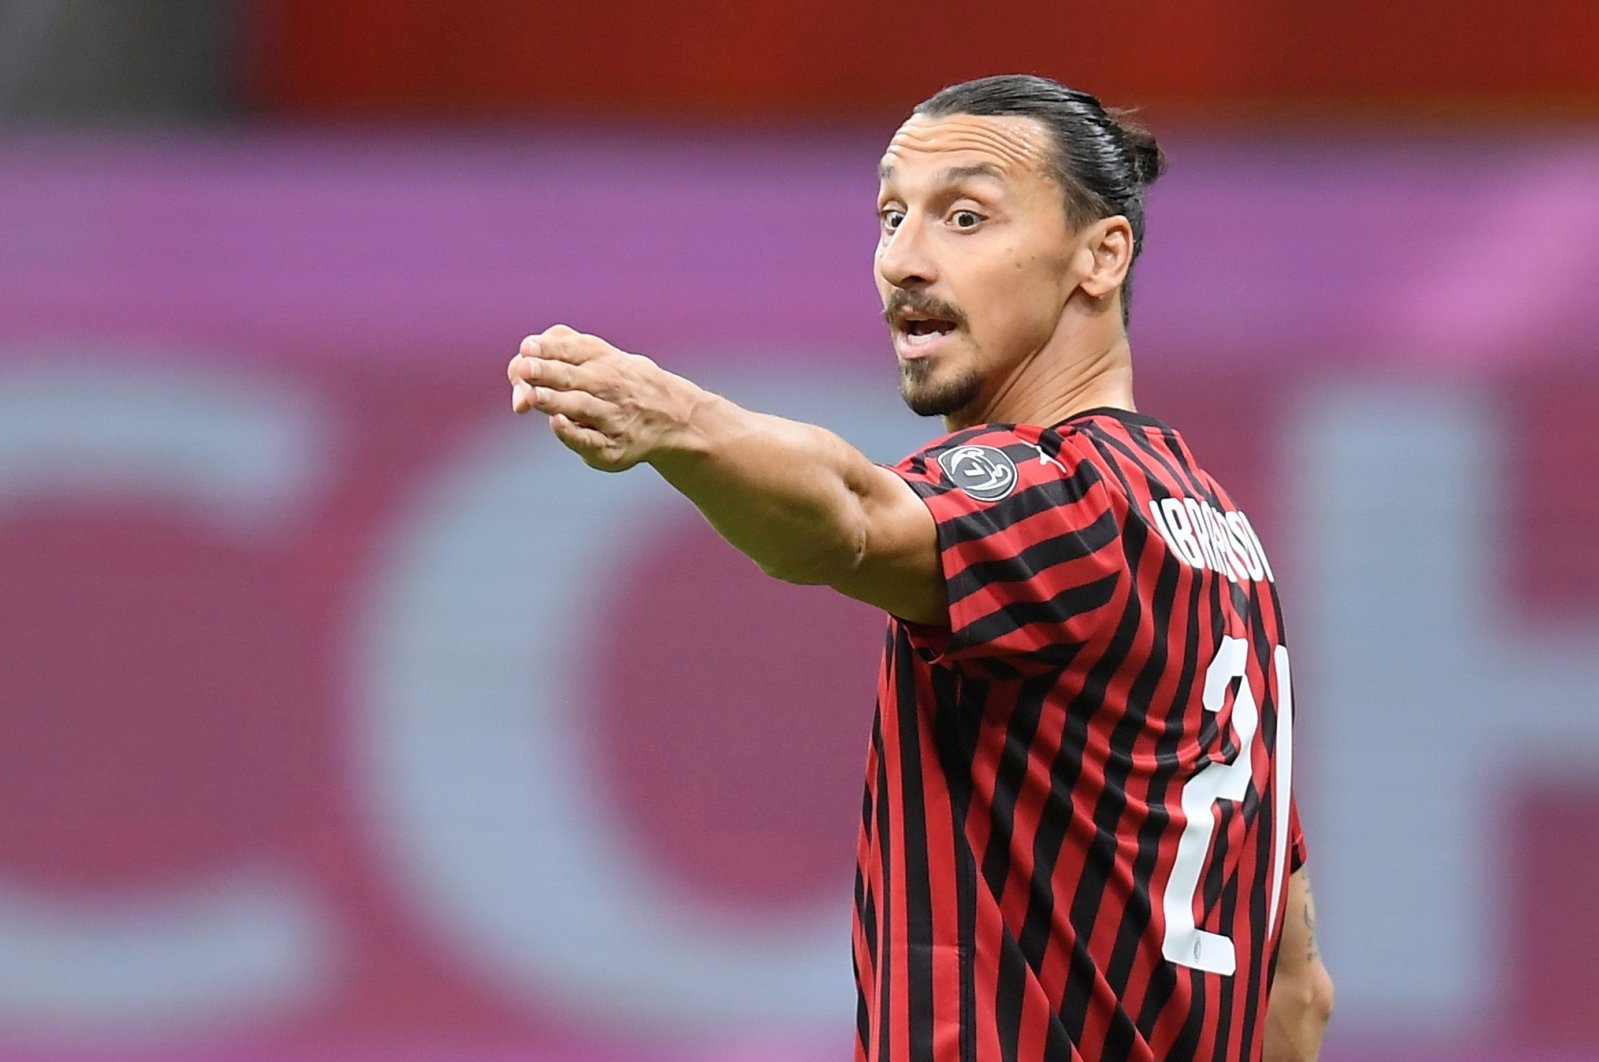 Zlatan Ibrahimovic reacts during a match, in Milan, Italy, July 24, 2020. (REUTERS Photo)